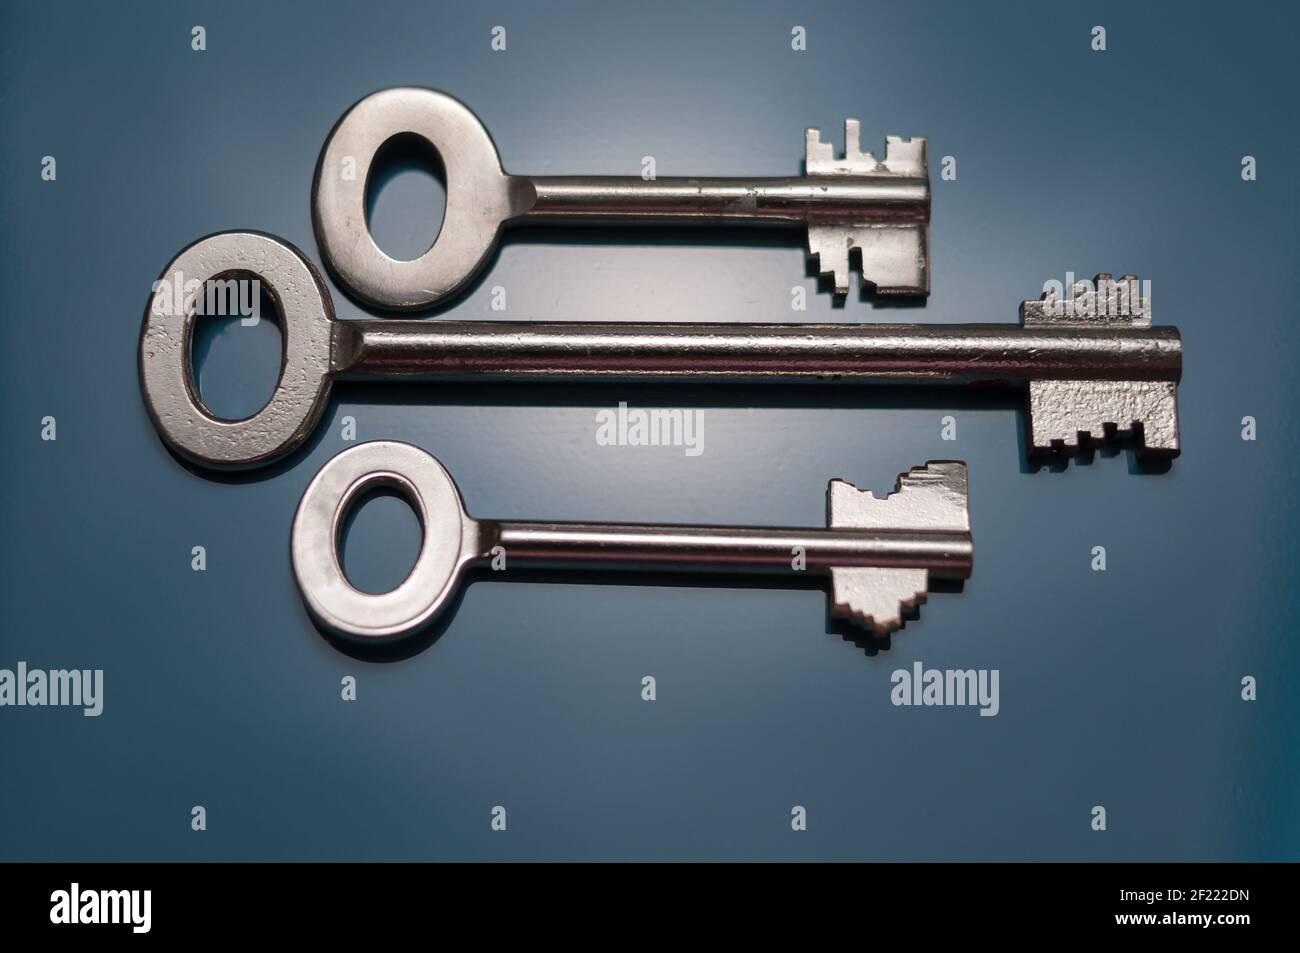 Still life with three safes keys in different designs on a black background Stock Photo